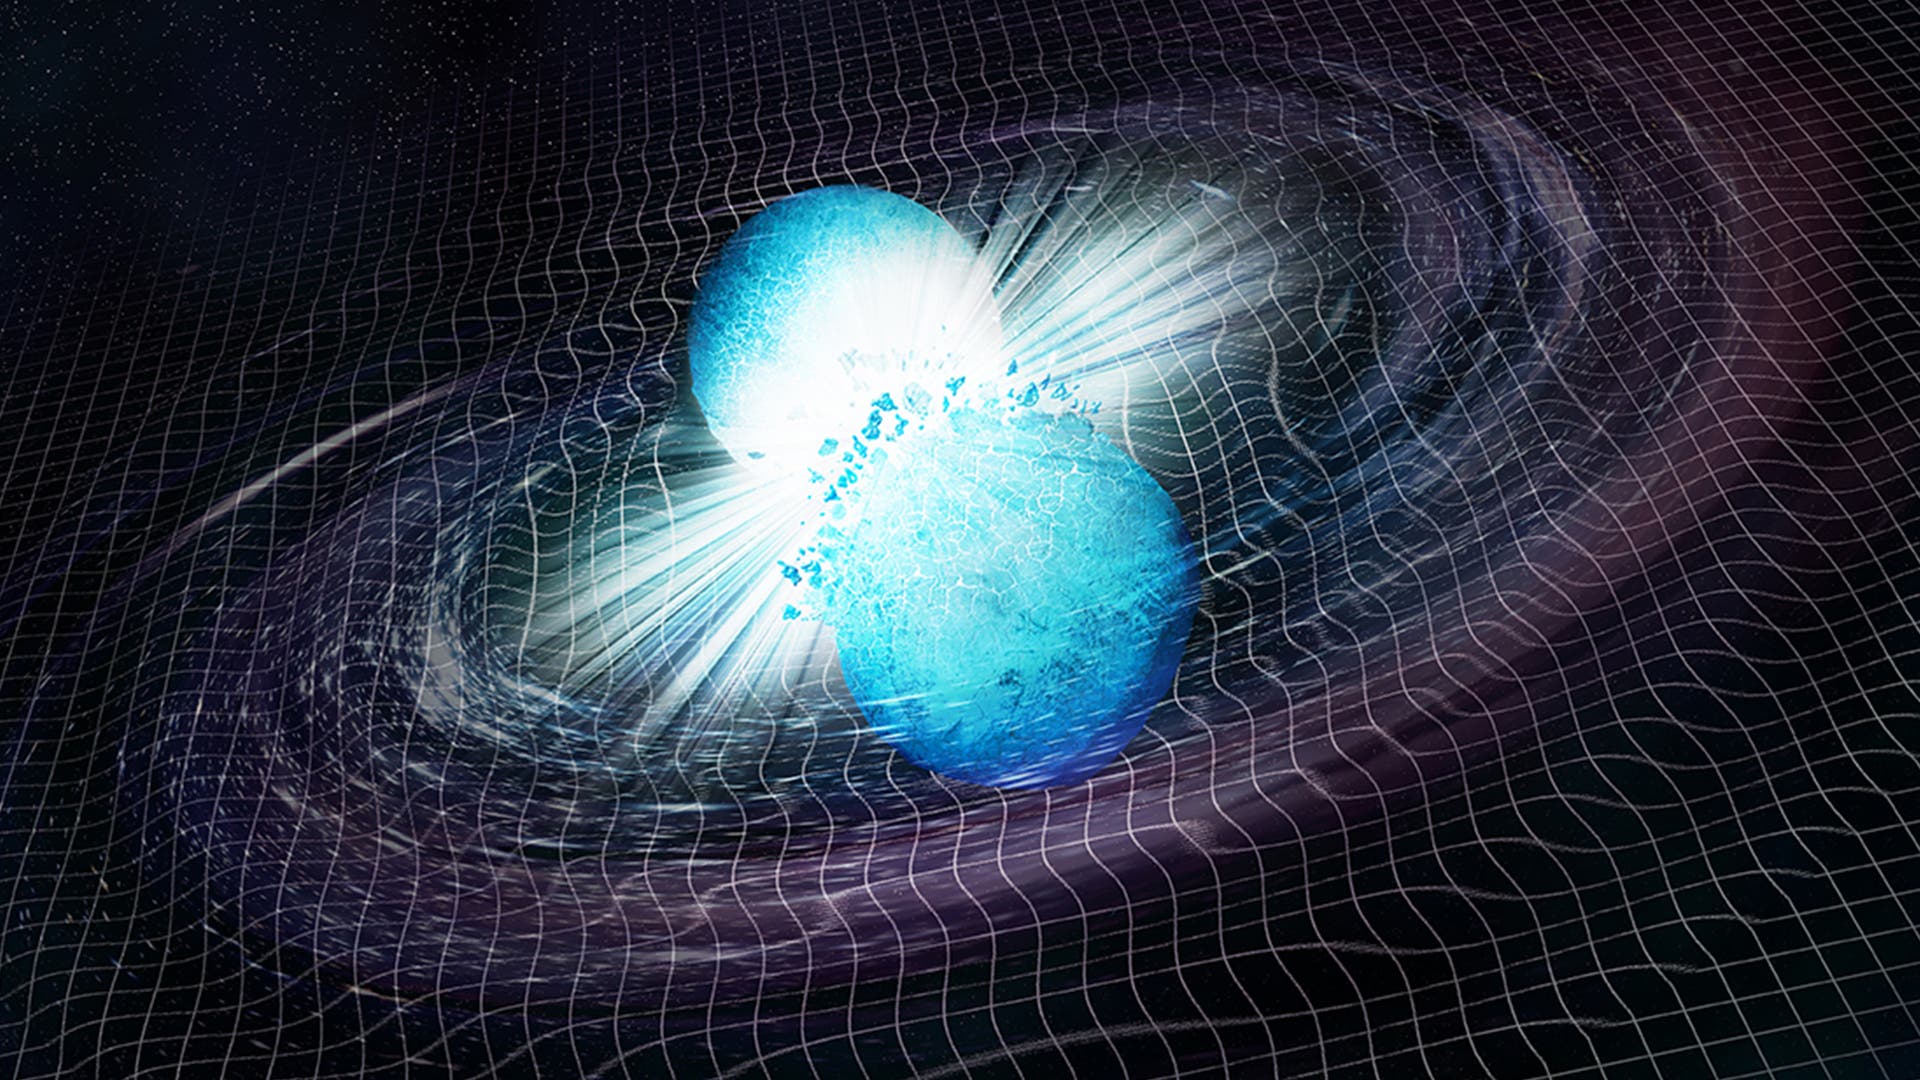 Searching for the signals of colliding neutron stars